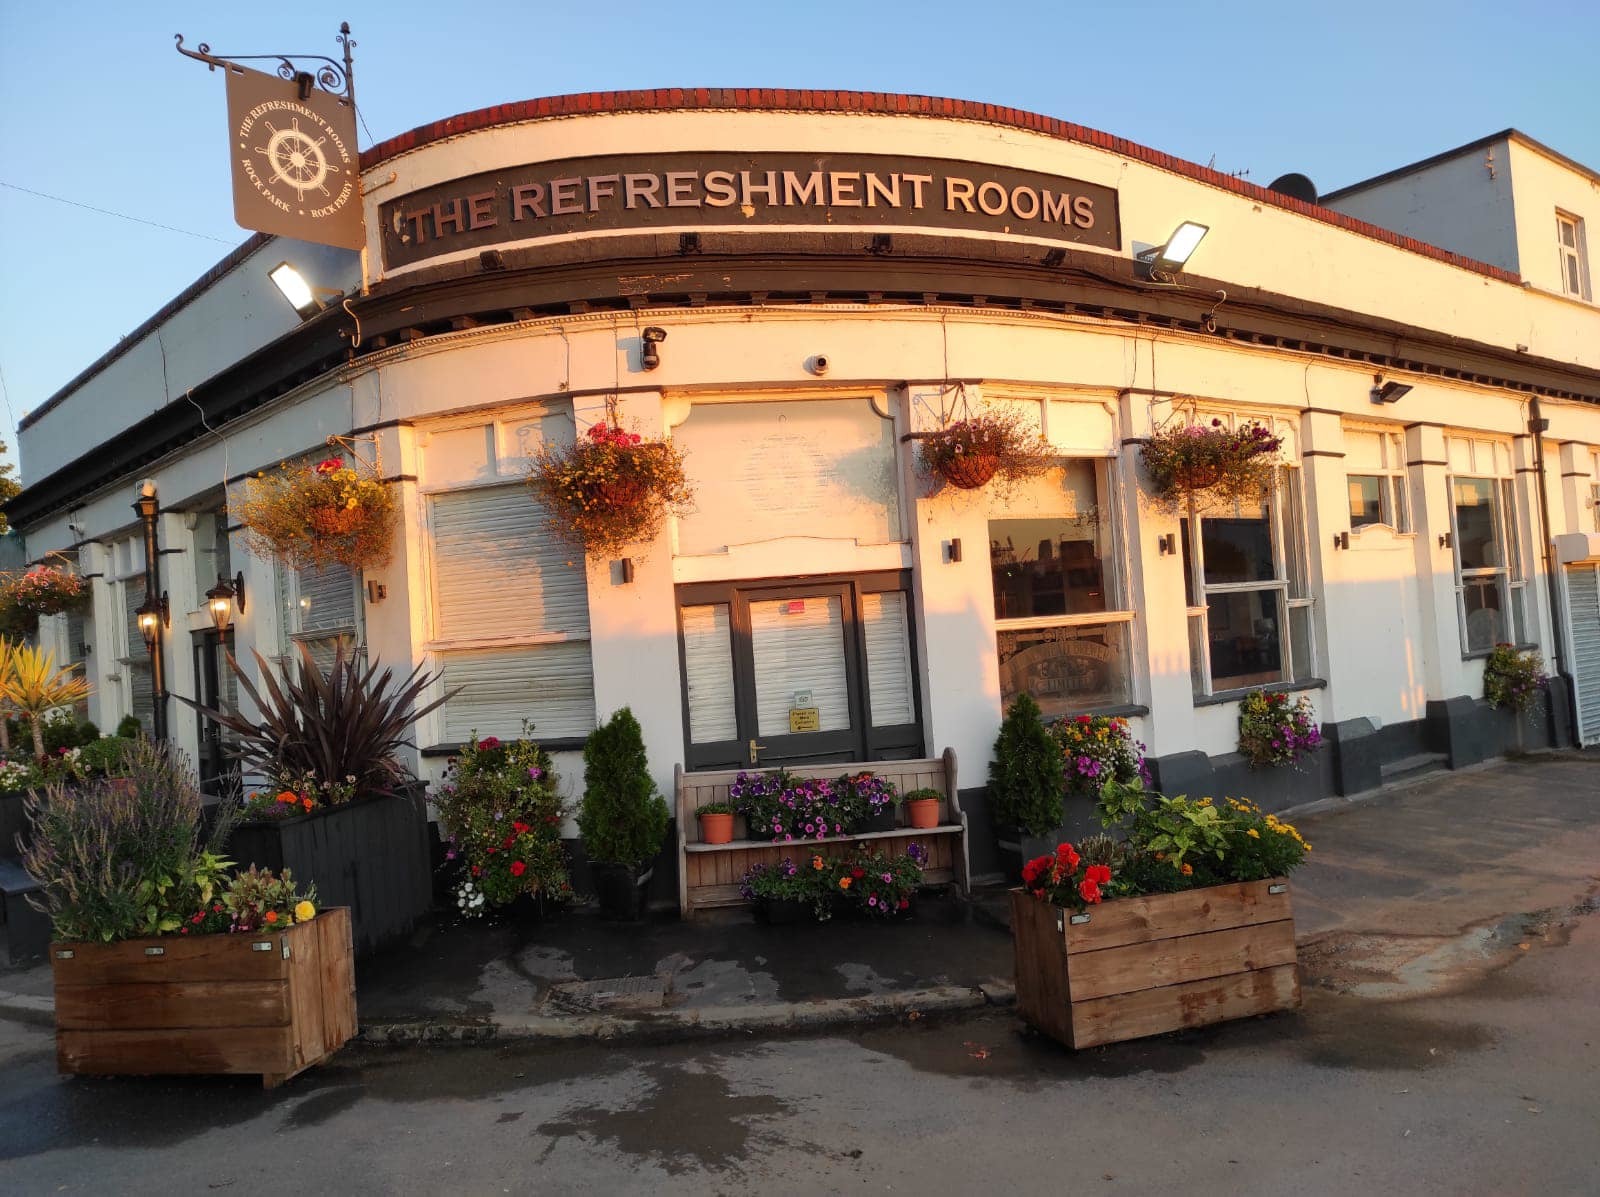 The Refreshment Rooms